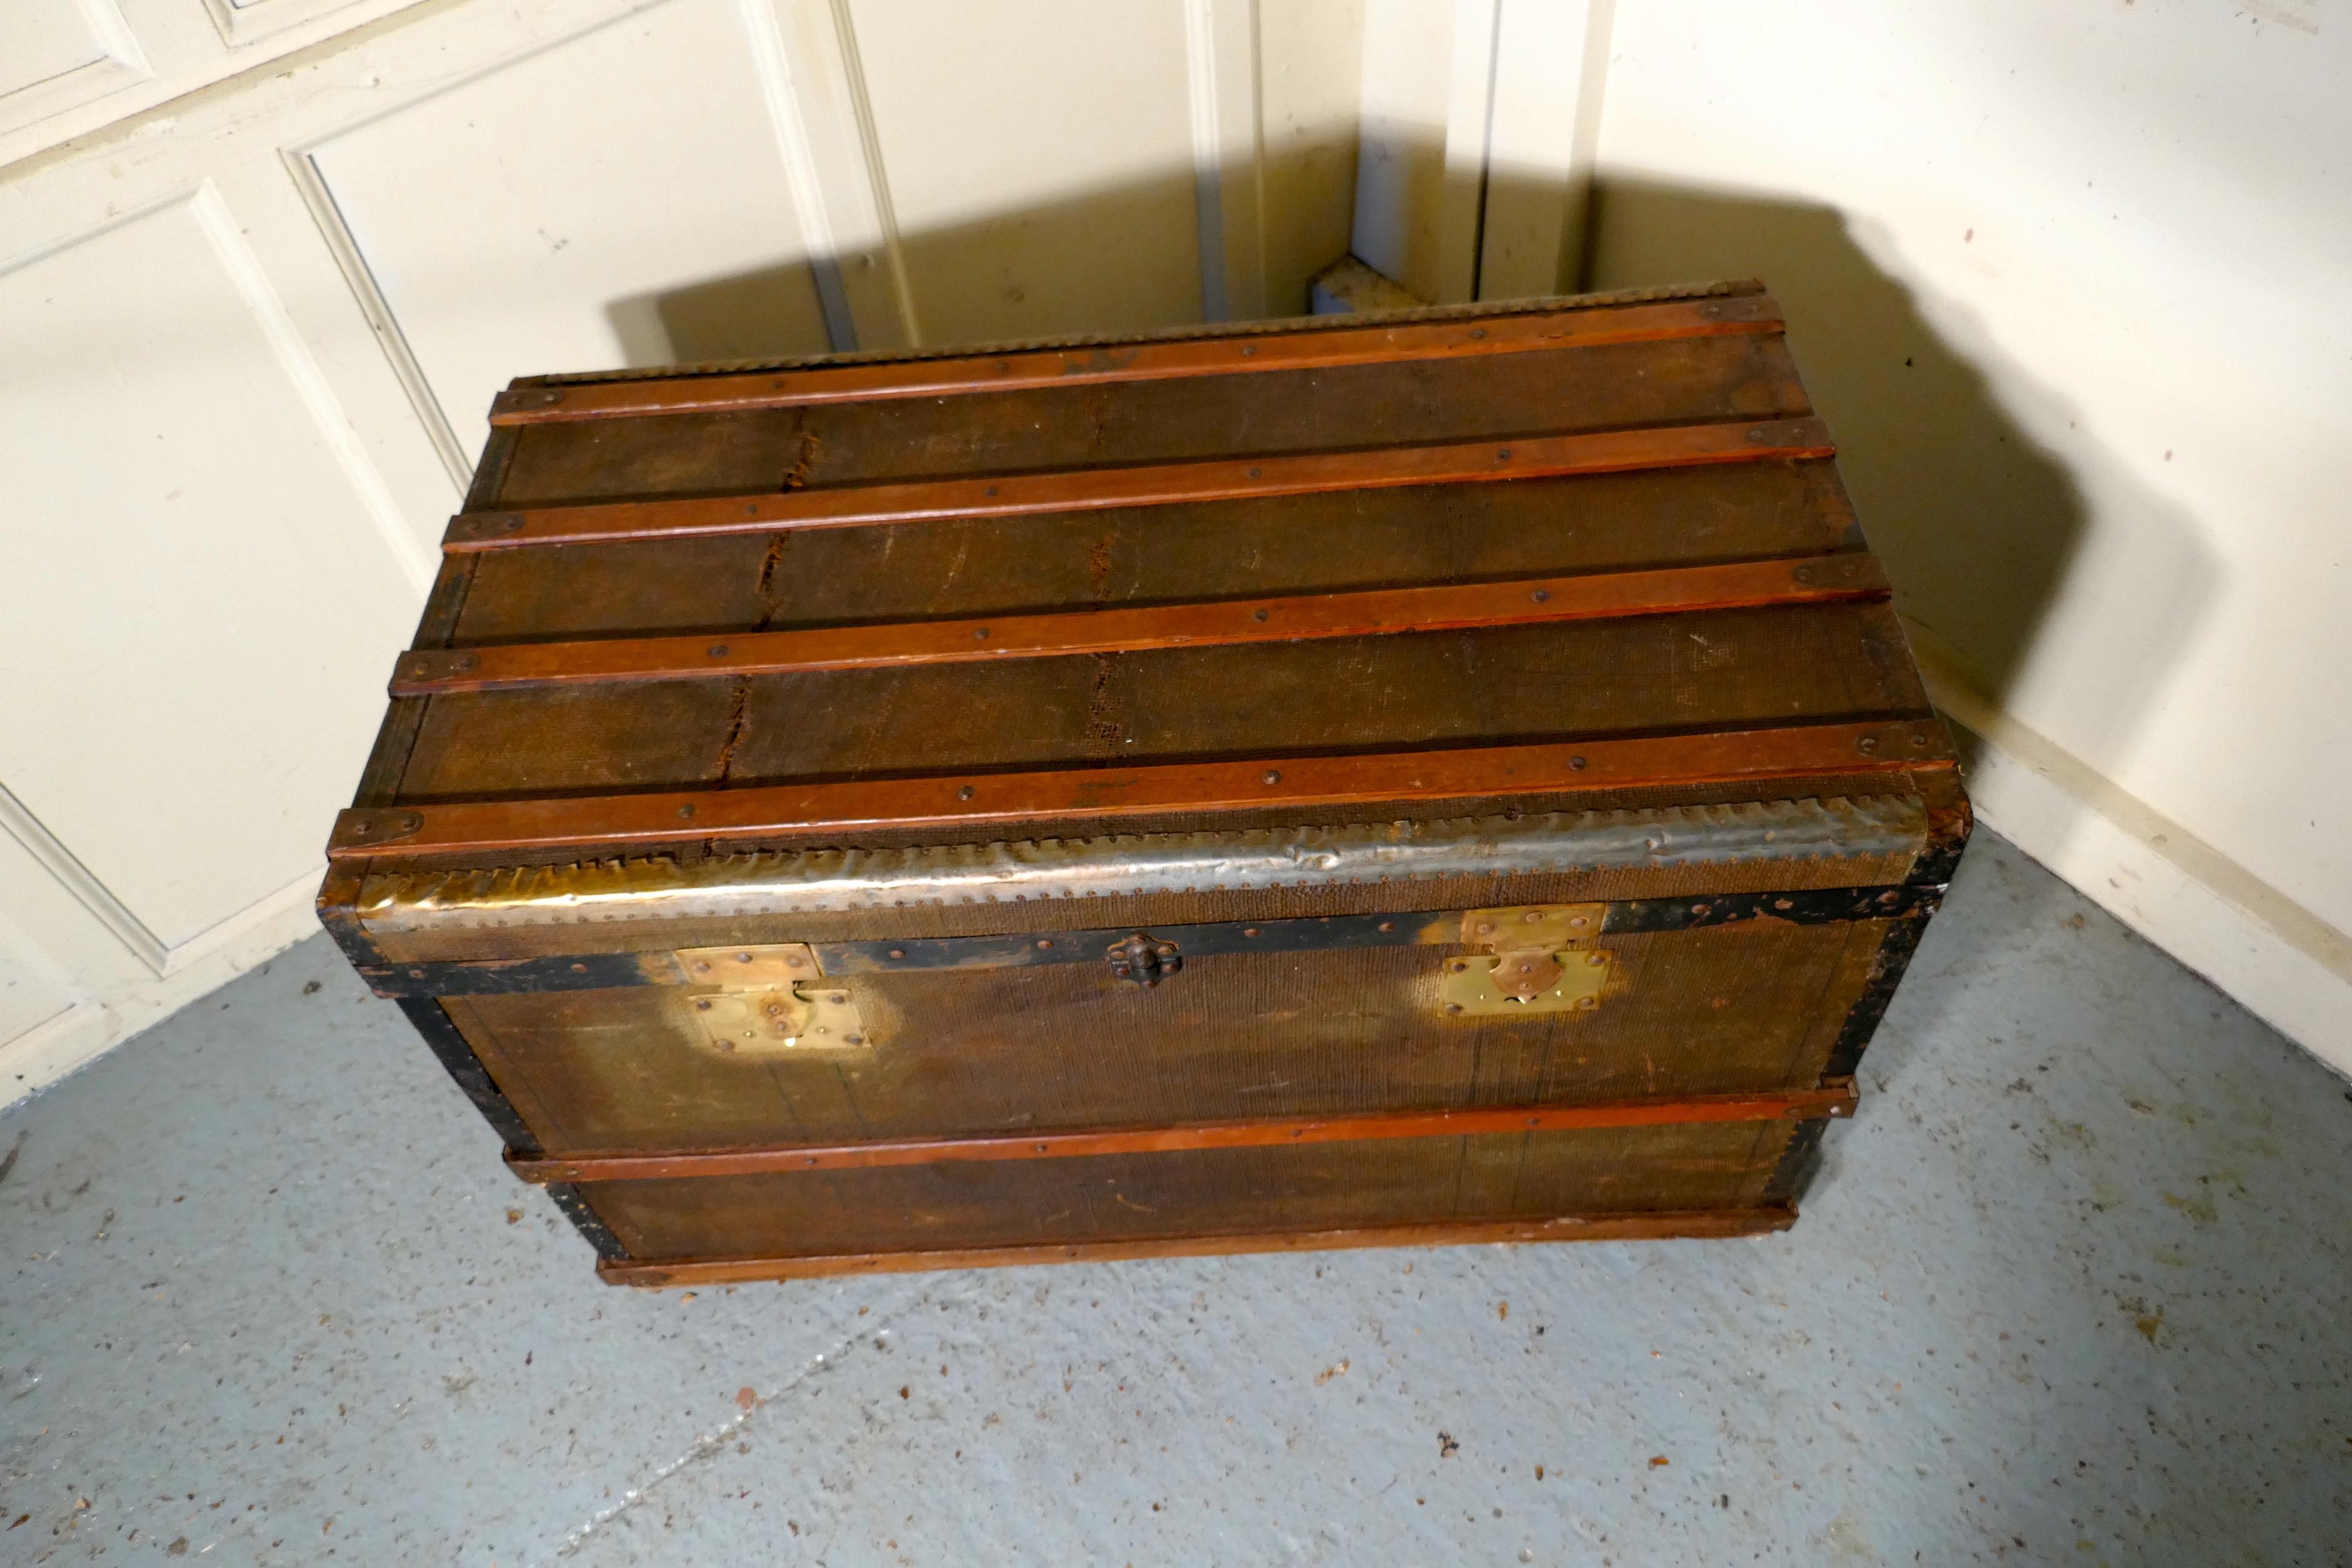 A Vintage Brass and Bound Canvas Travel Steamer Trunk  A very useful decorative  In Good Condition For Sale In Chillerton, Isle of Wight